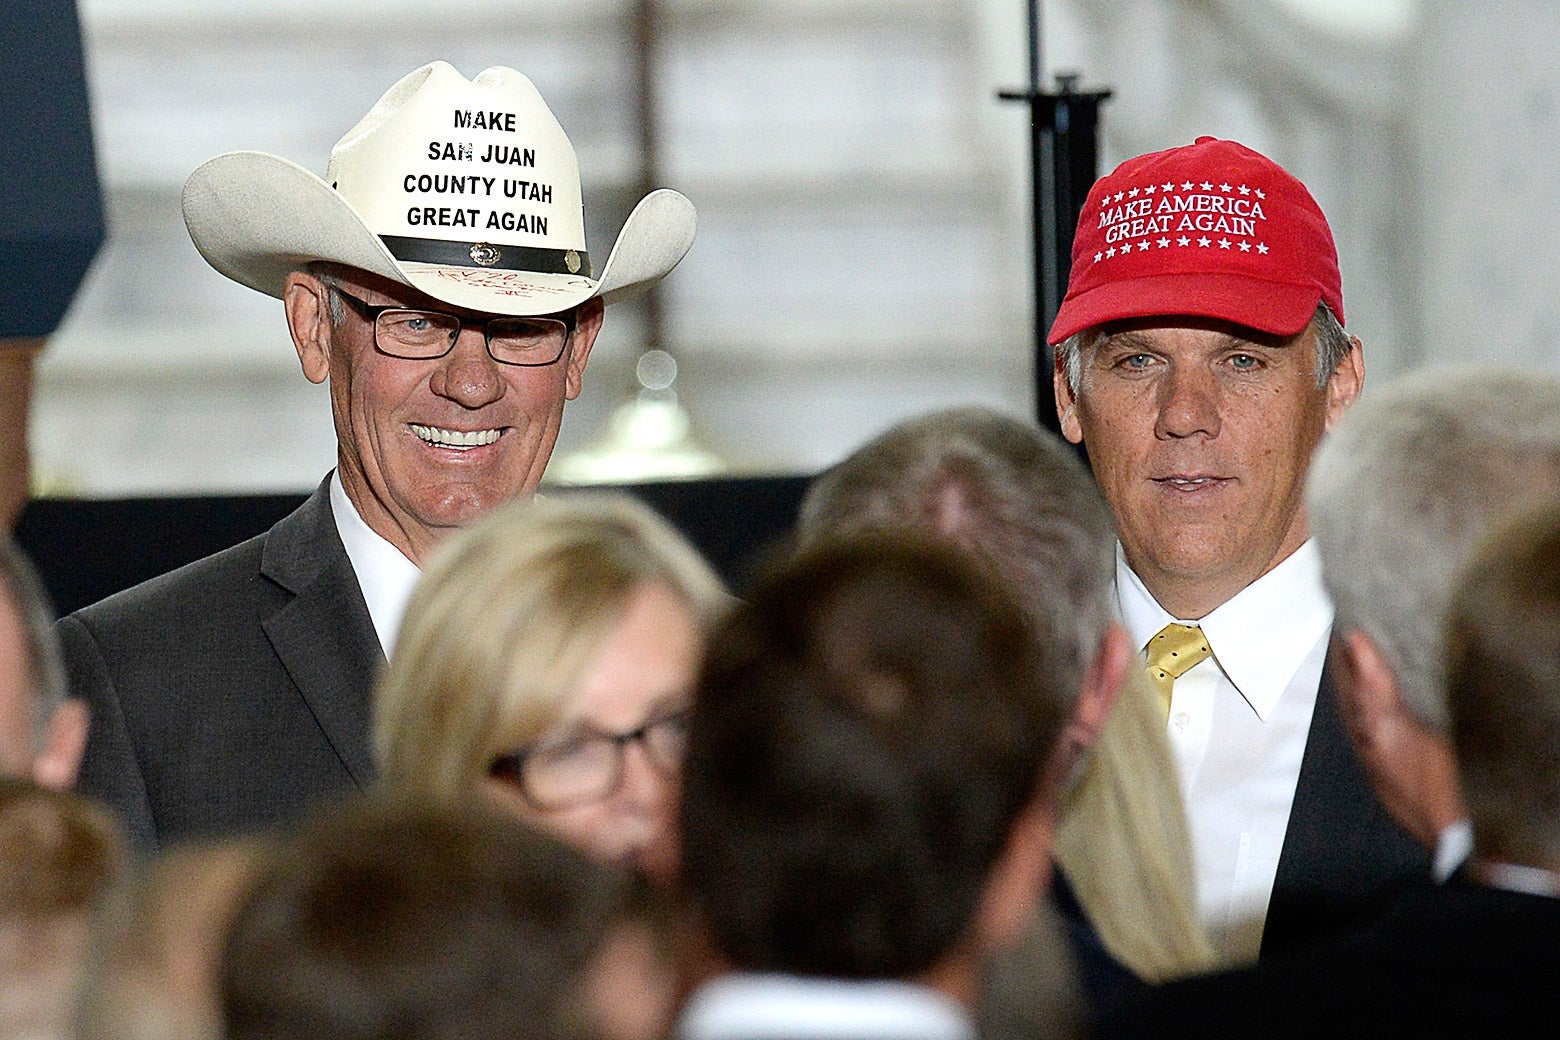 Bruce Adams wears a "Make San Juan County Utah Great Again" cowboy hat and Phil Lyman wears a MAGA hat as they pose for photographs in front of a crowd